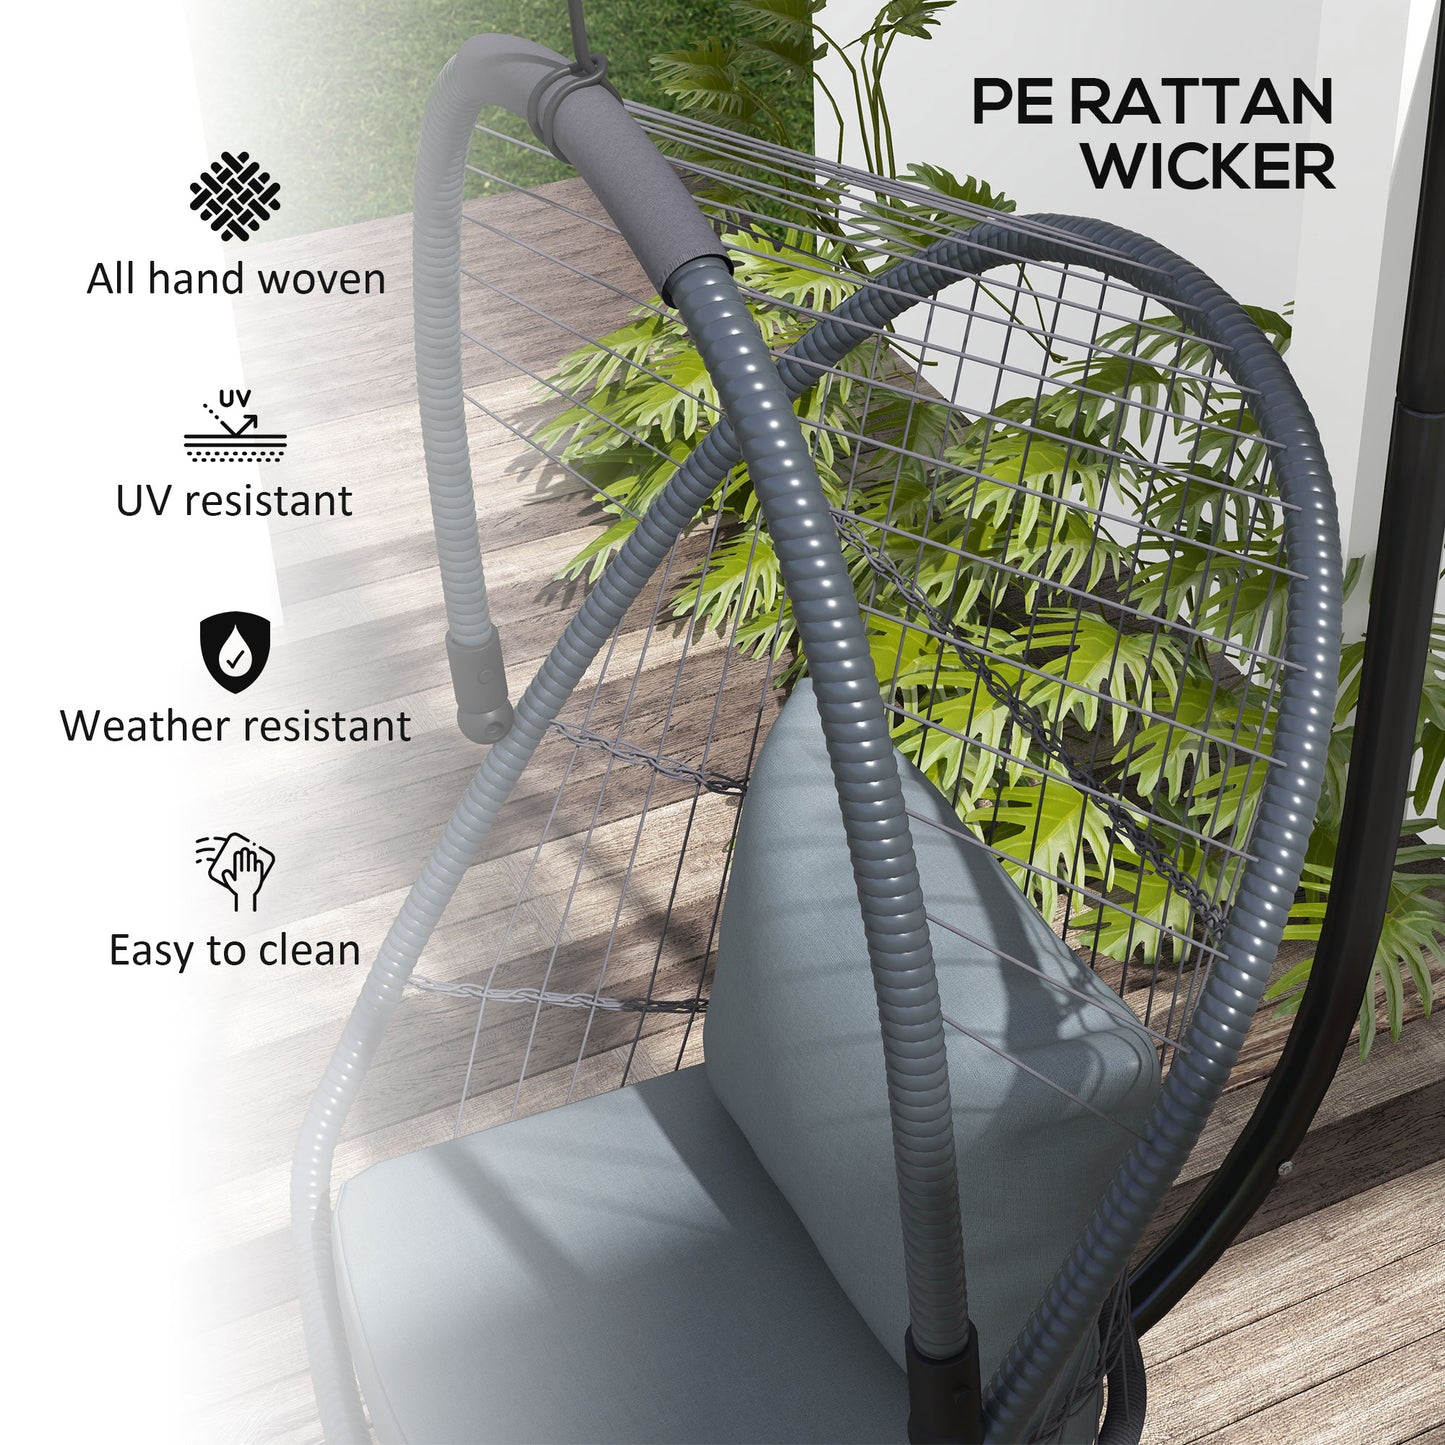 Outsunny Outdoor PE Rattan Swing Chair with Cushion, Foldable Basket Patio Hanging Chair w/ Metal Stand, Rotation Spring Hook, Basket Height